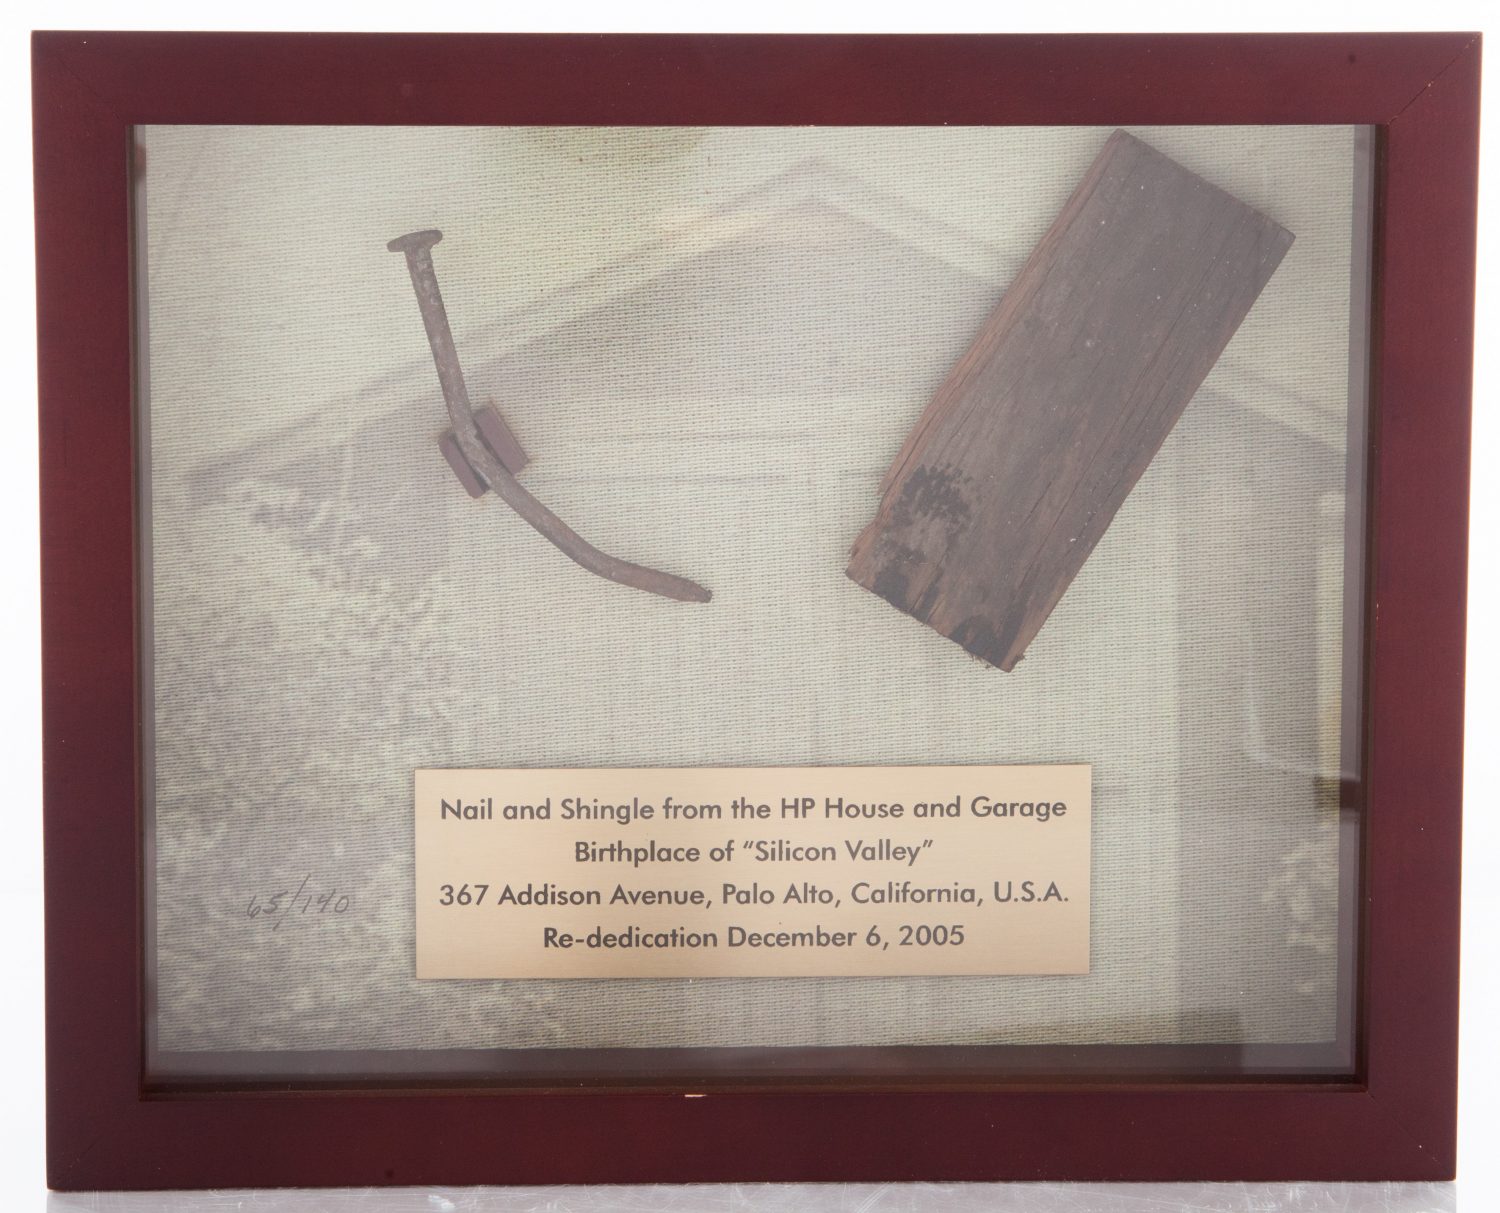 Framed nail and shingle from the HP House and Garage on Addison Avenue with plaque.